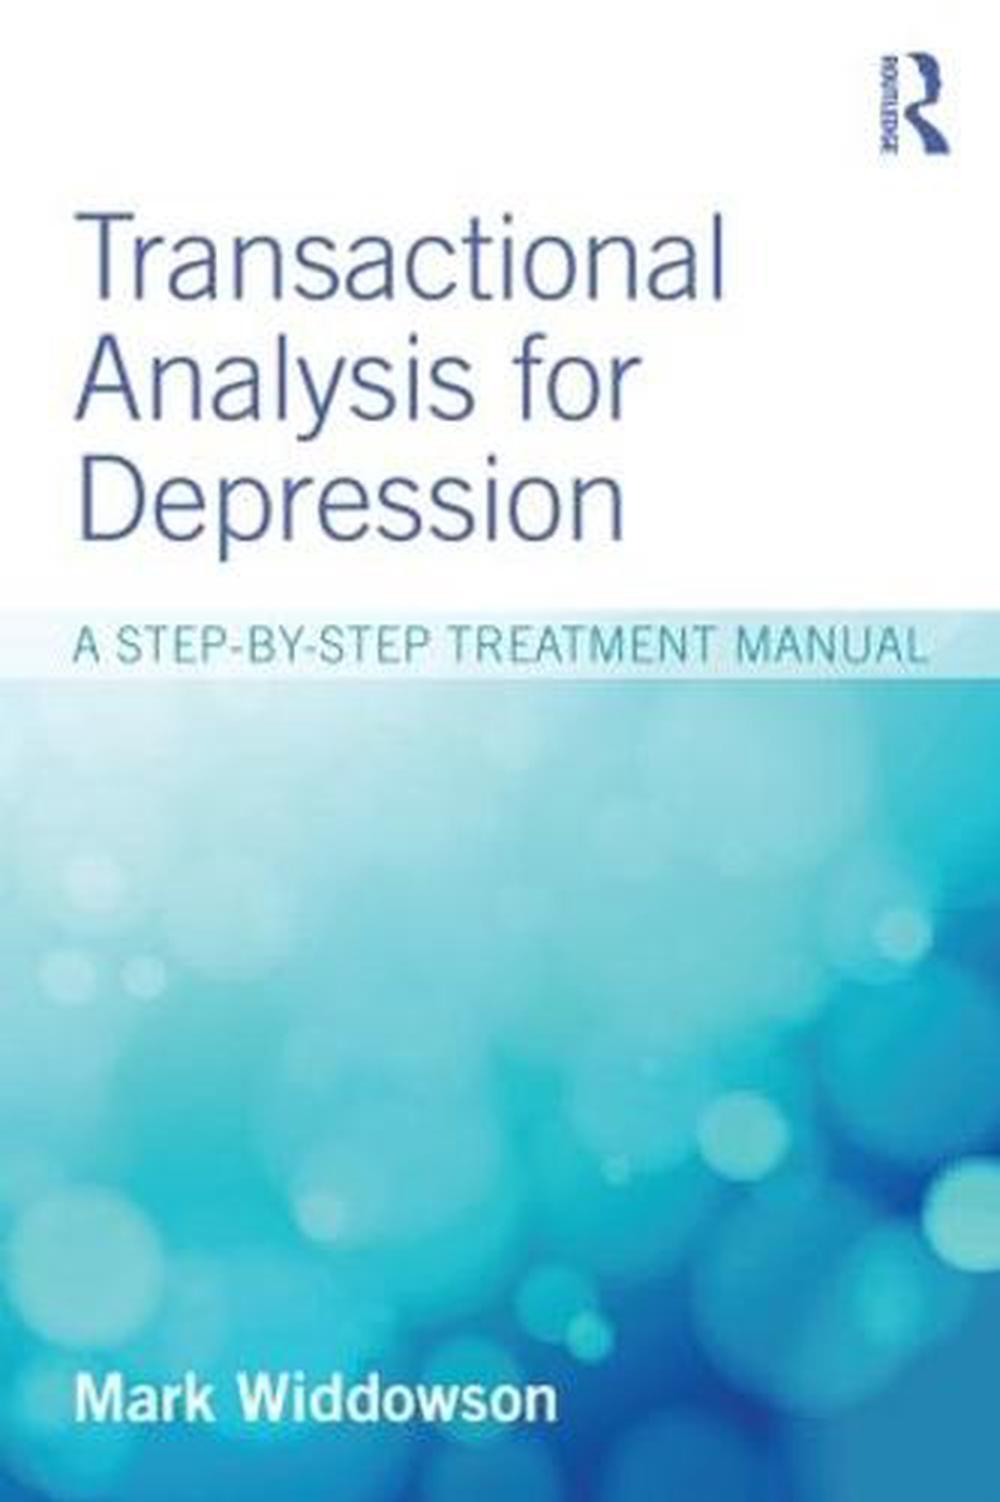 TRANSACTIONAL ANALYSIS FOR DEPRESSION : A STEP-BY-STEP TREATMENT MANUAL